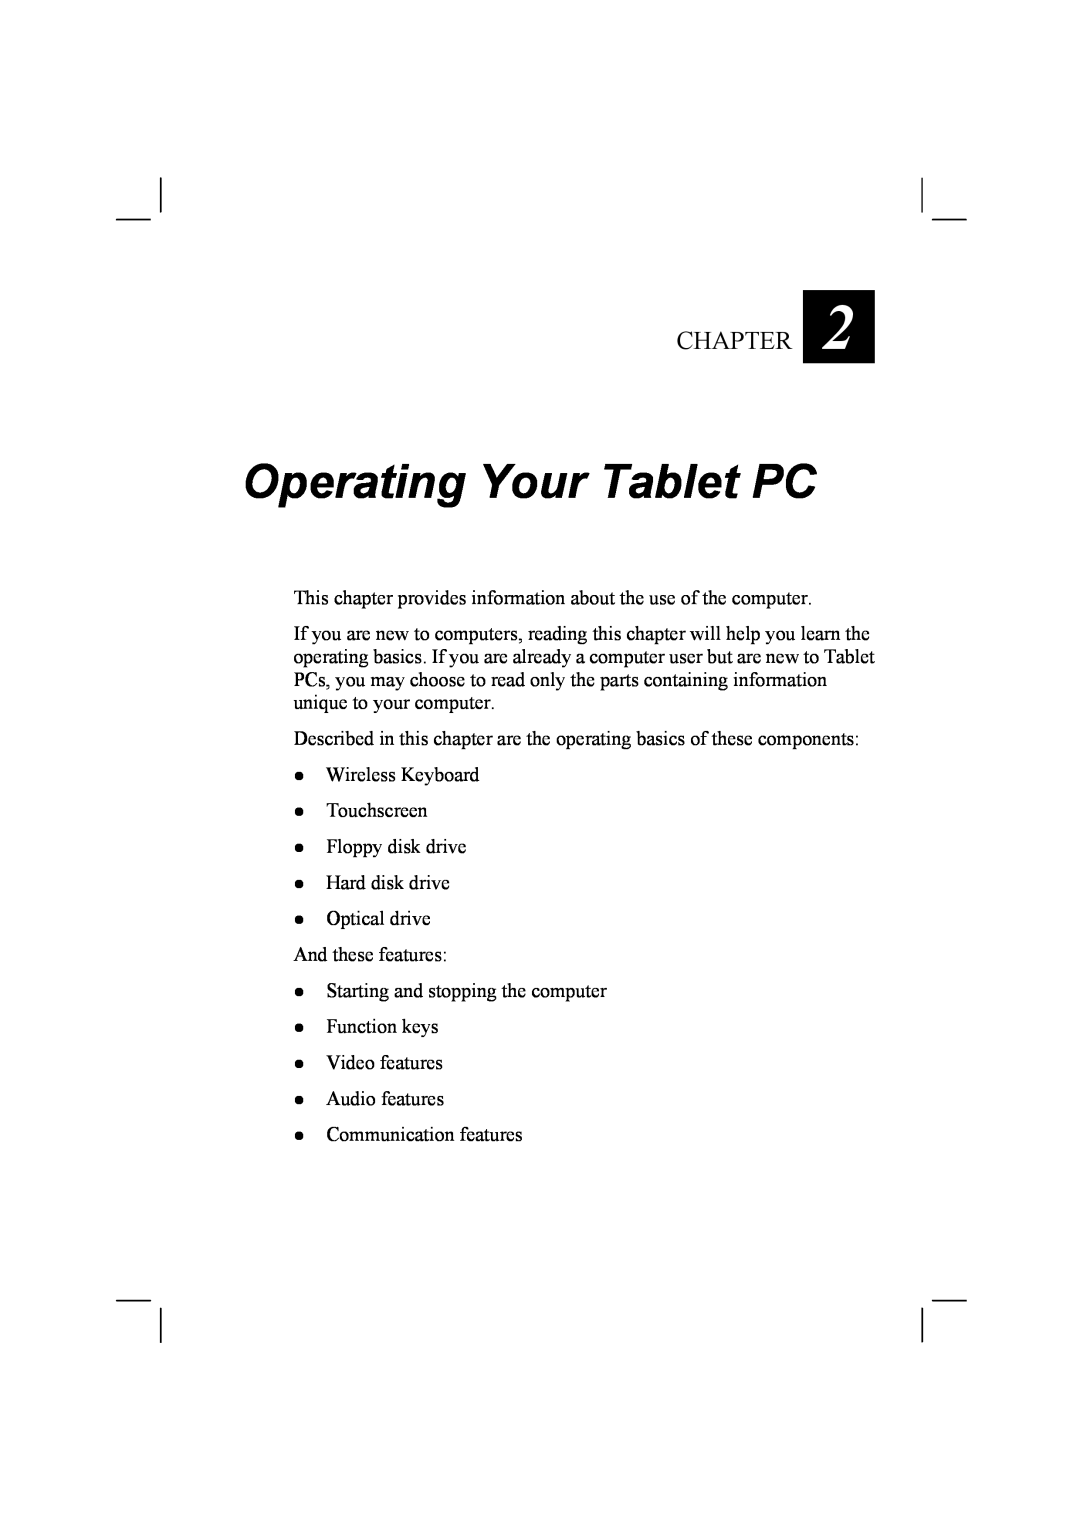 TAG 20 Series manual Operating Your Tablet PC, Chapter 